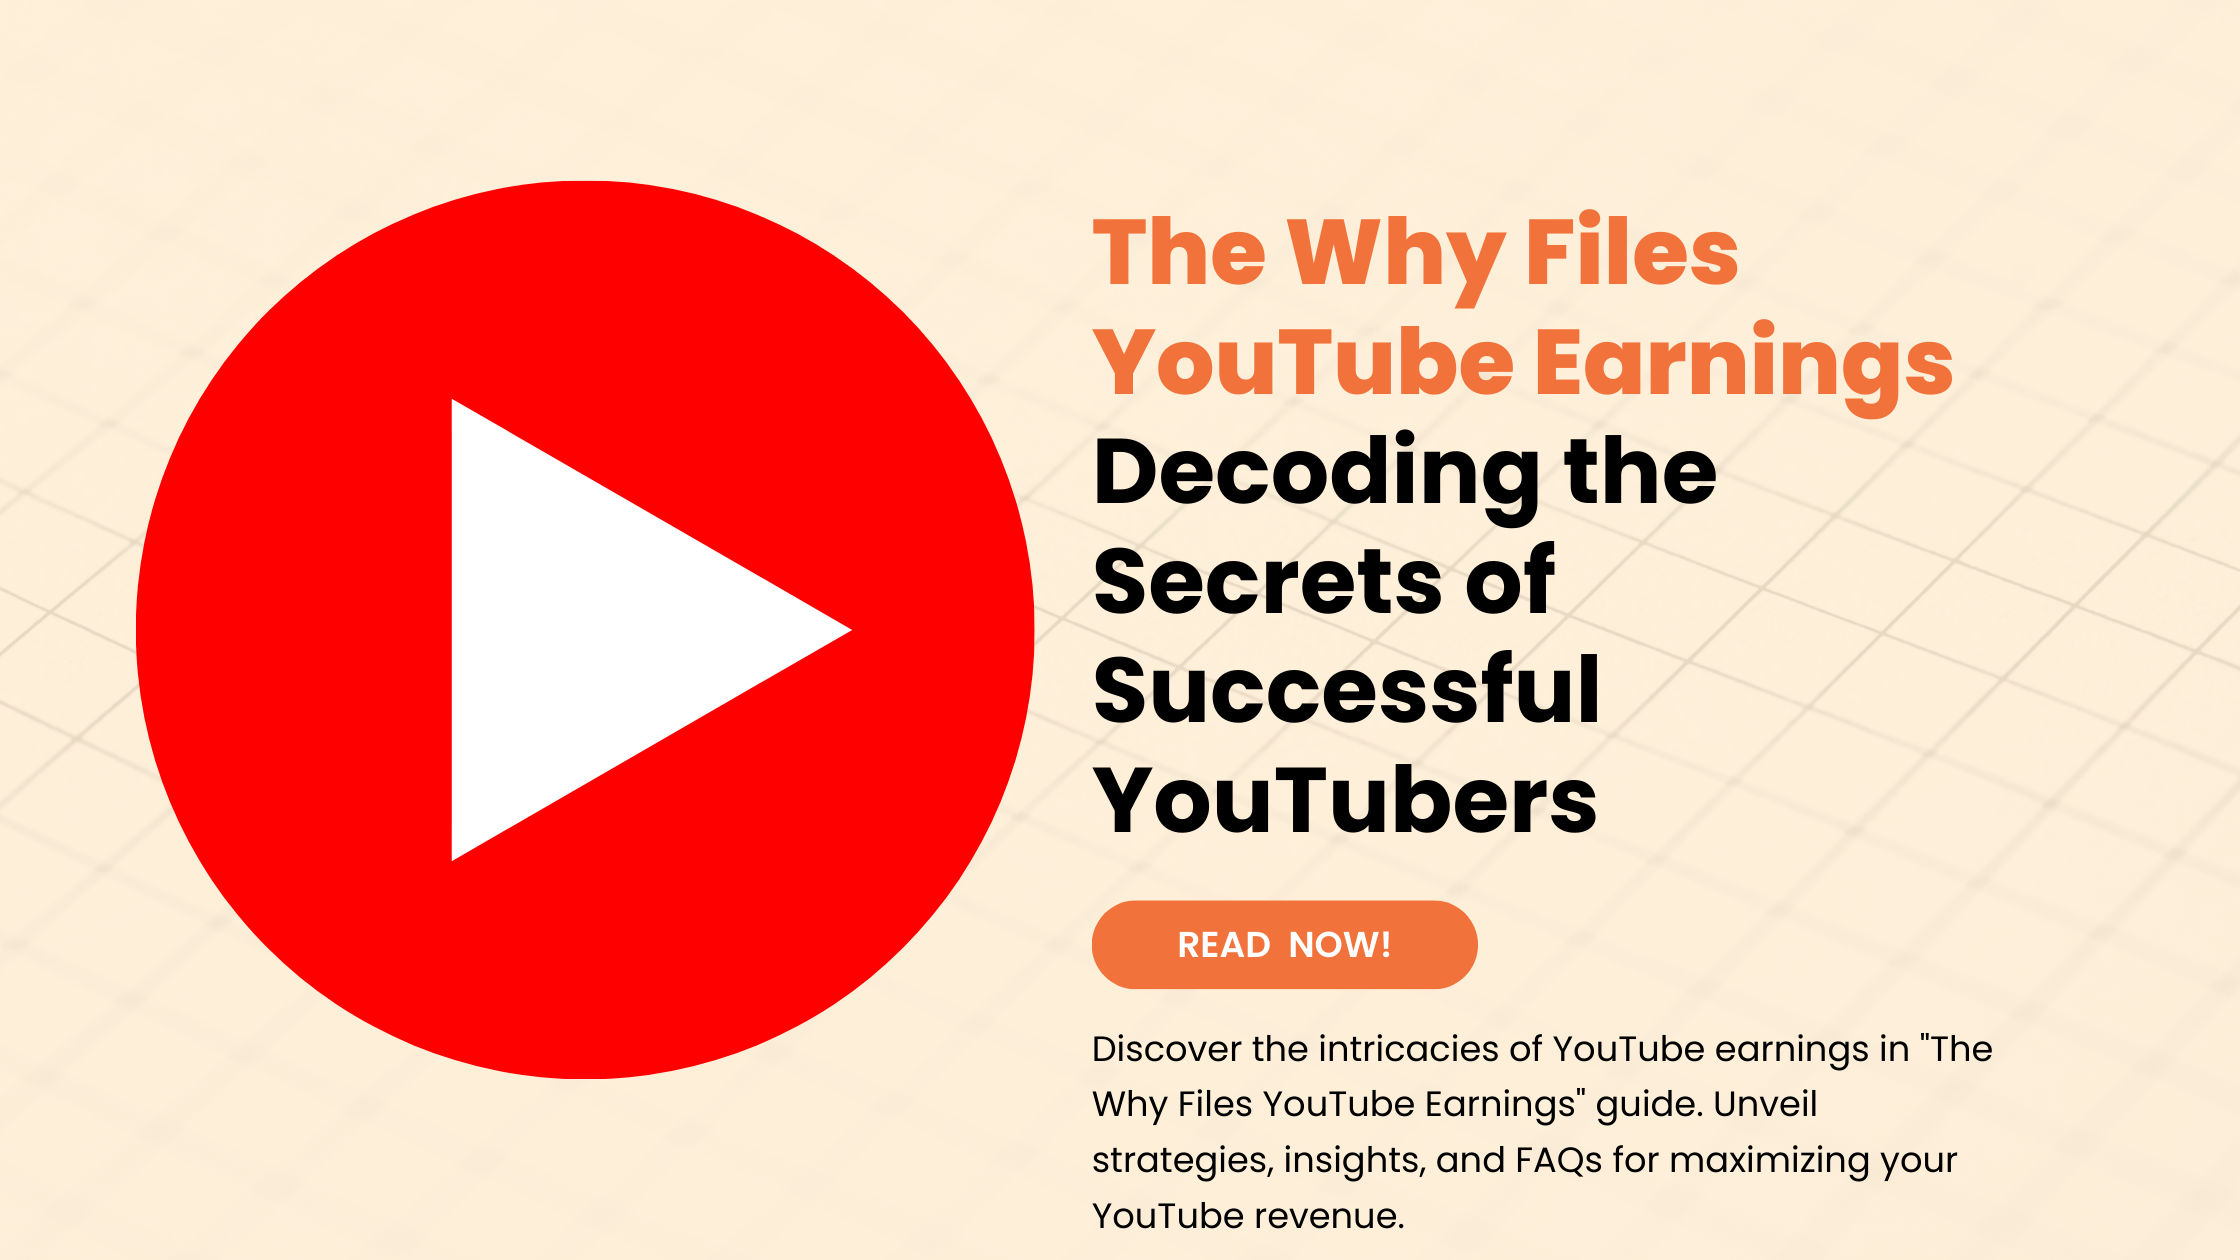 The Why Files YouTube Earnings